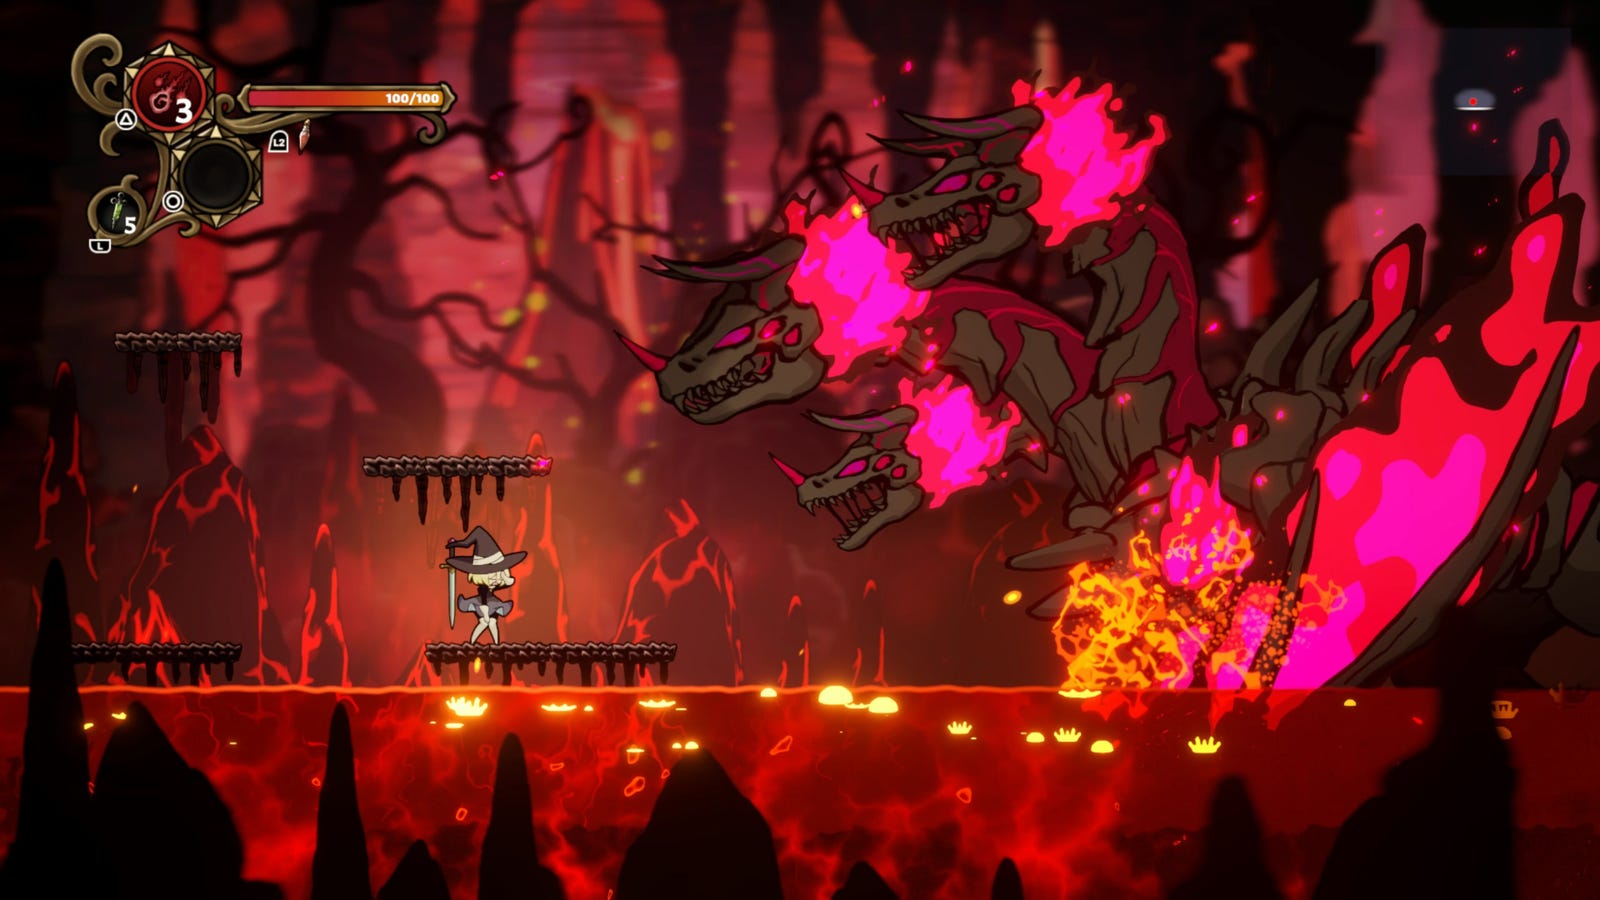 Palworld devs' next game is a base-building Dead Cells and Hollow Knight mash-up